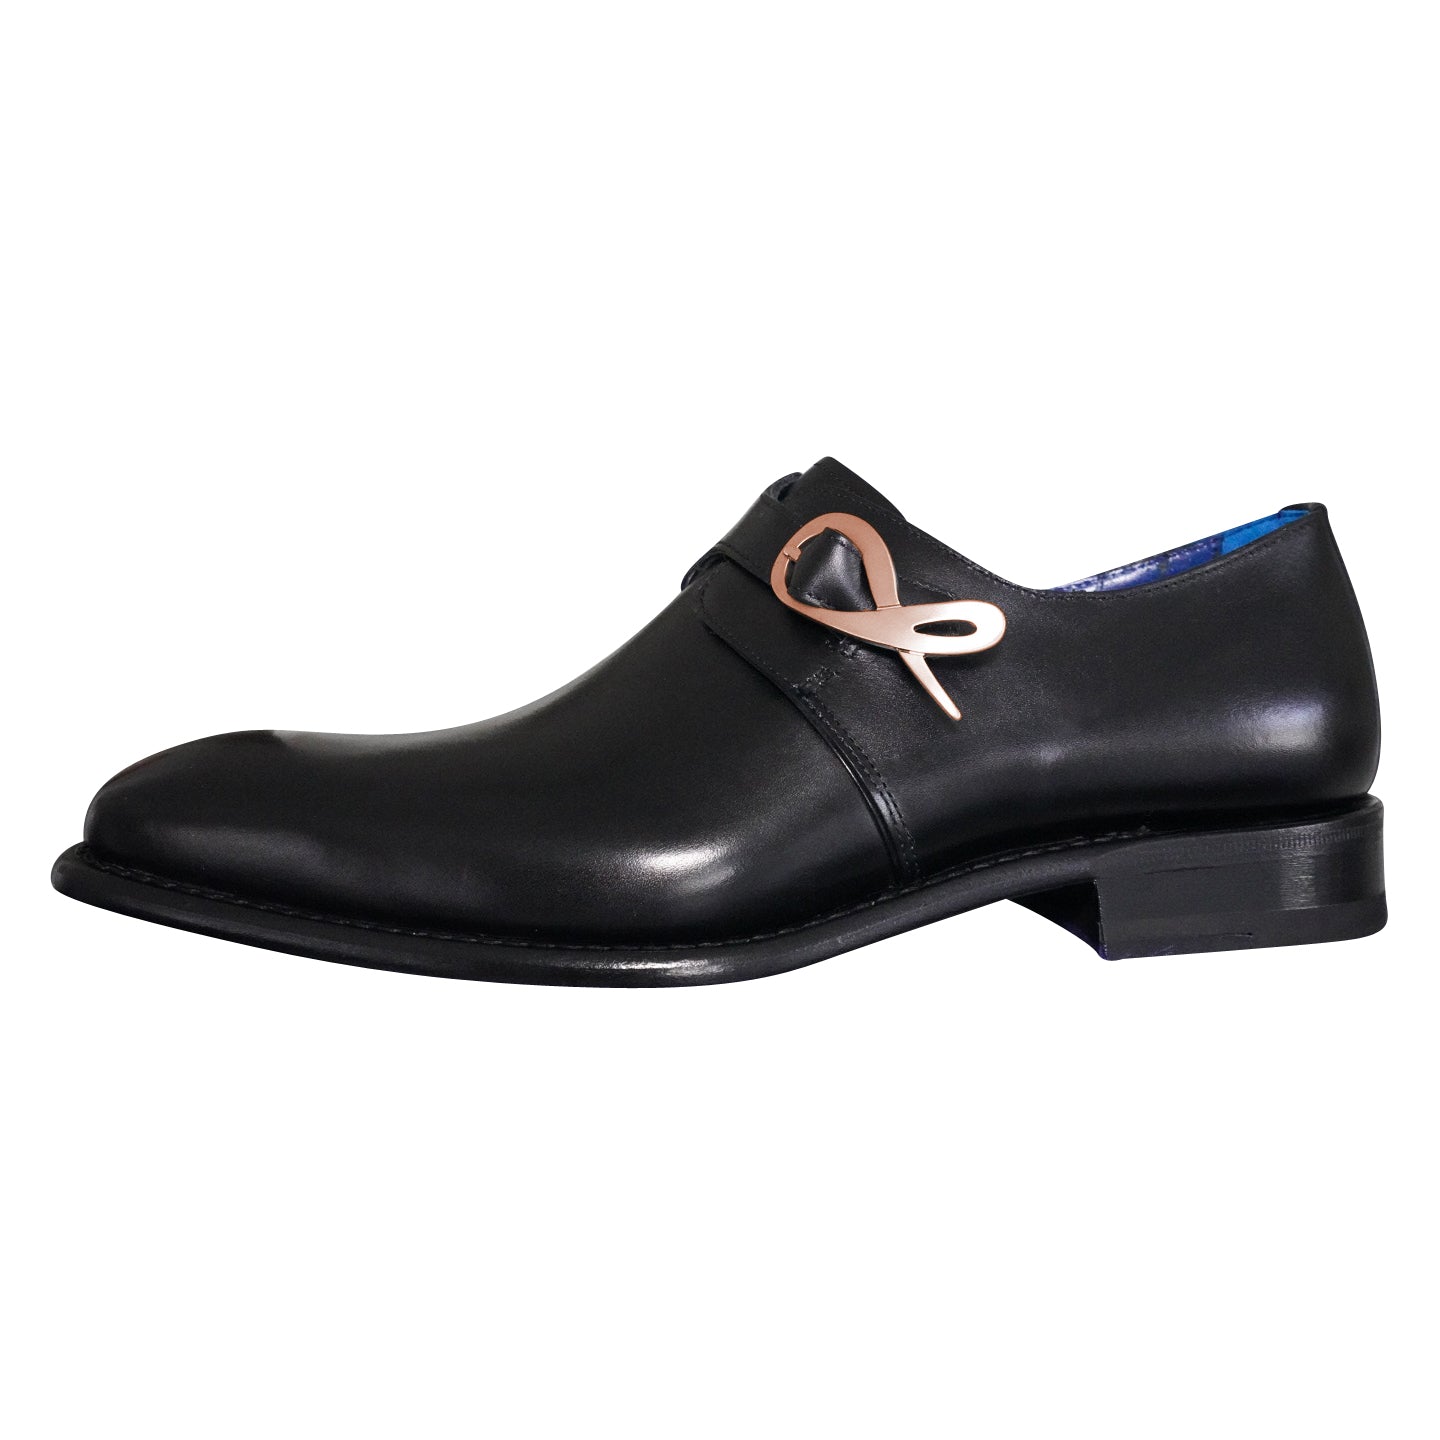 Nero Opal With Rose Gold Hardware Monk Strap